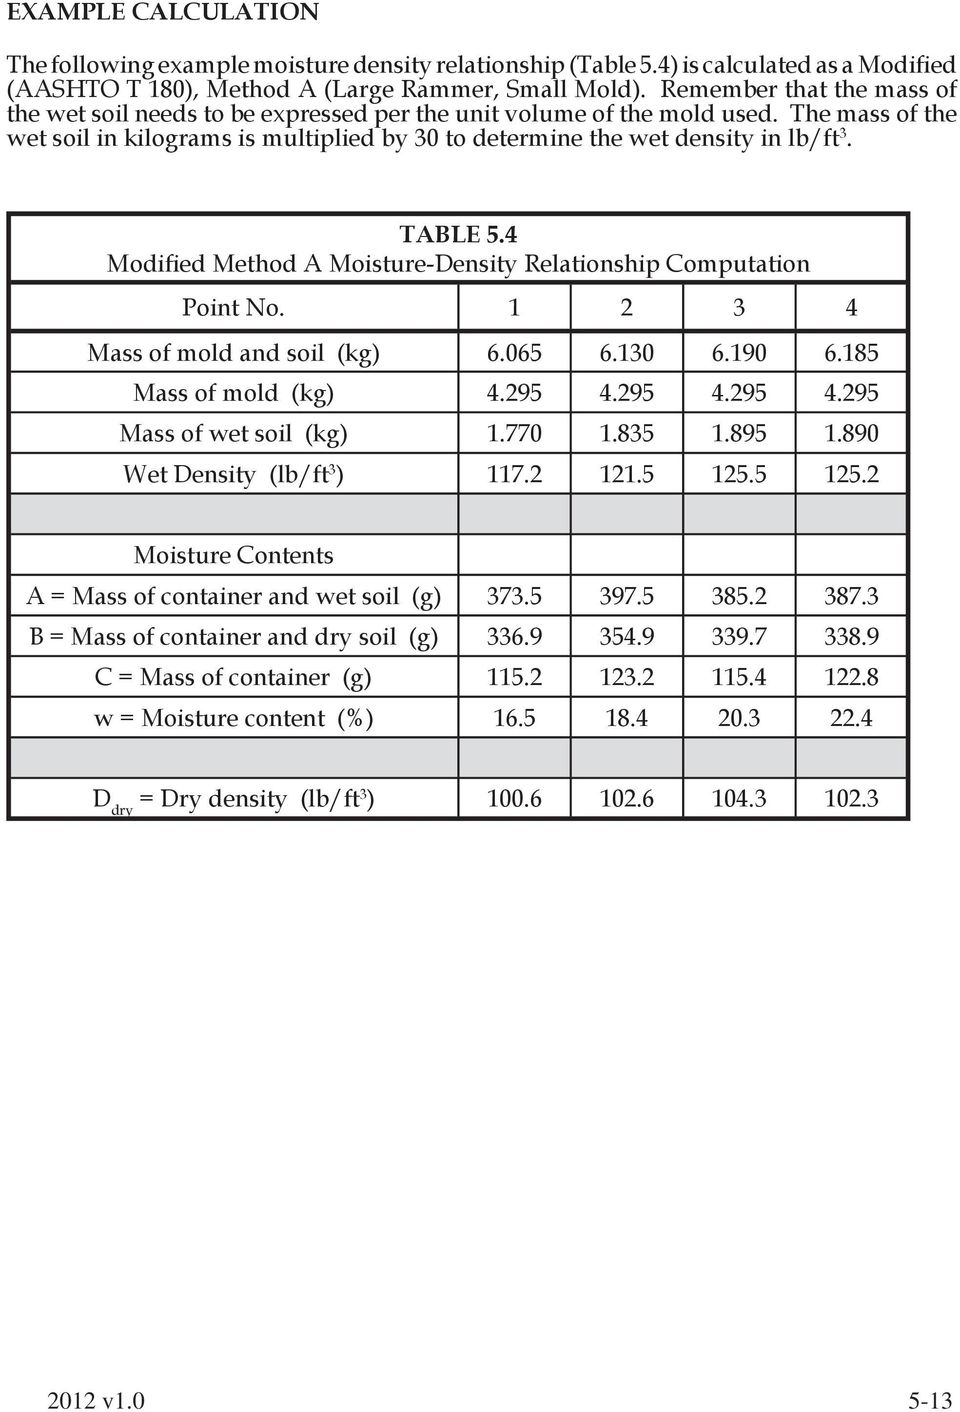 TABLE 5.4 Modified Method A Moisture-Density Relationship Computation Point No. 1 2 3 4 Mass of mold and soil (kg) 6.065 6.130 6.190 6.185 Mass of mold (kg) 4.295 4.295 4.295 4.295 Mass of wet soil (kg) 1.